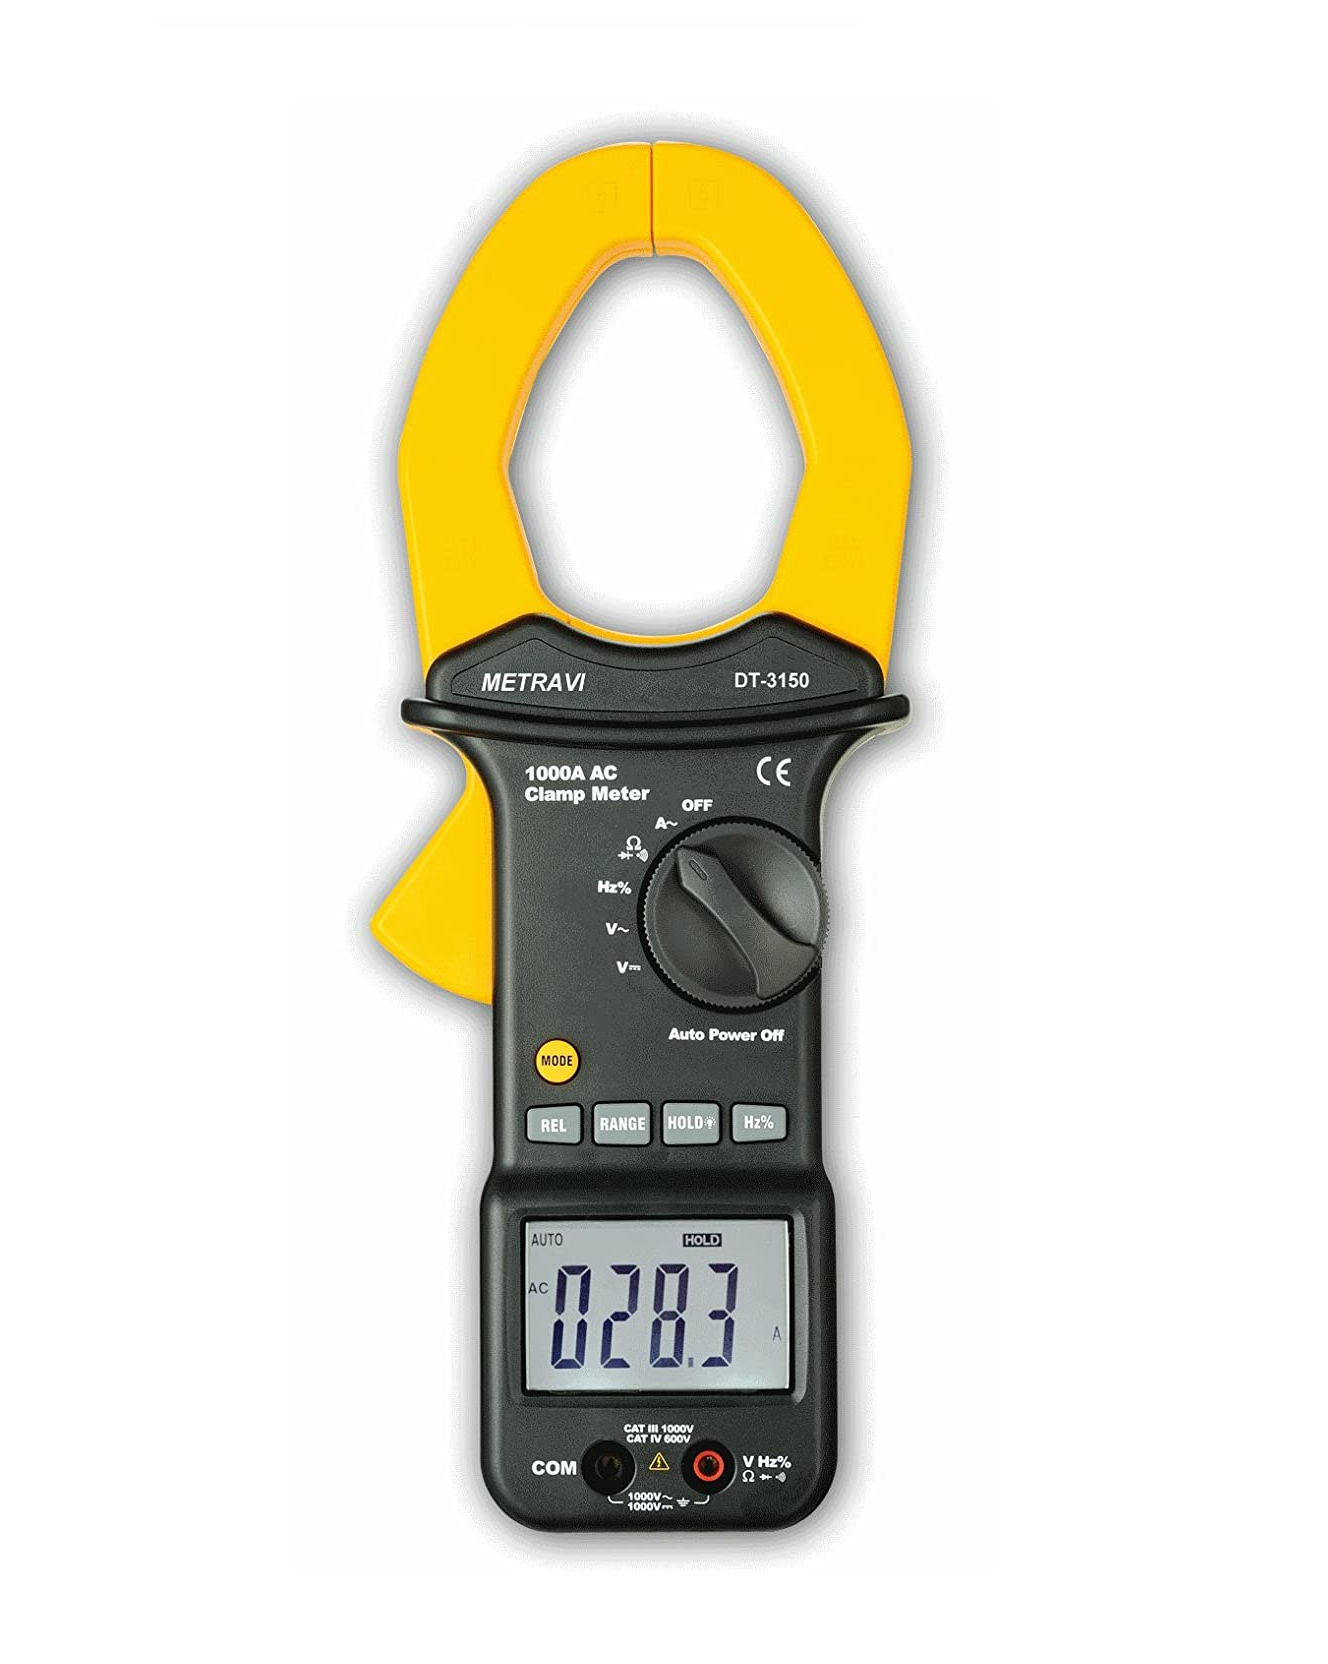 Metravi DT-3150 Big Jaw AC Clamp Meter, Fully Protected, 1000A AC